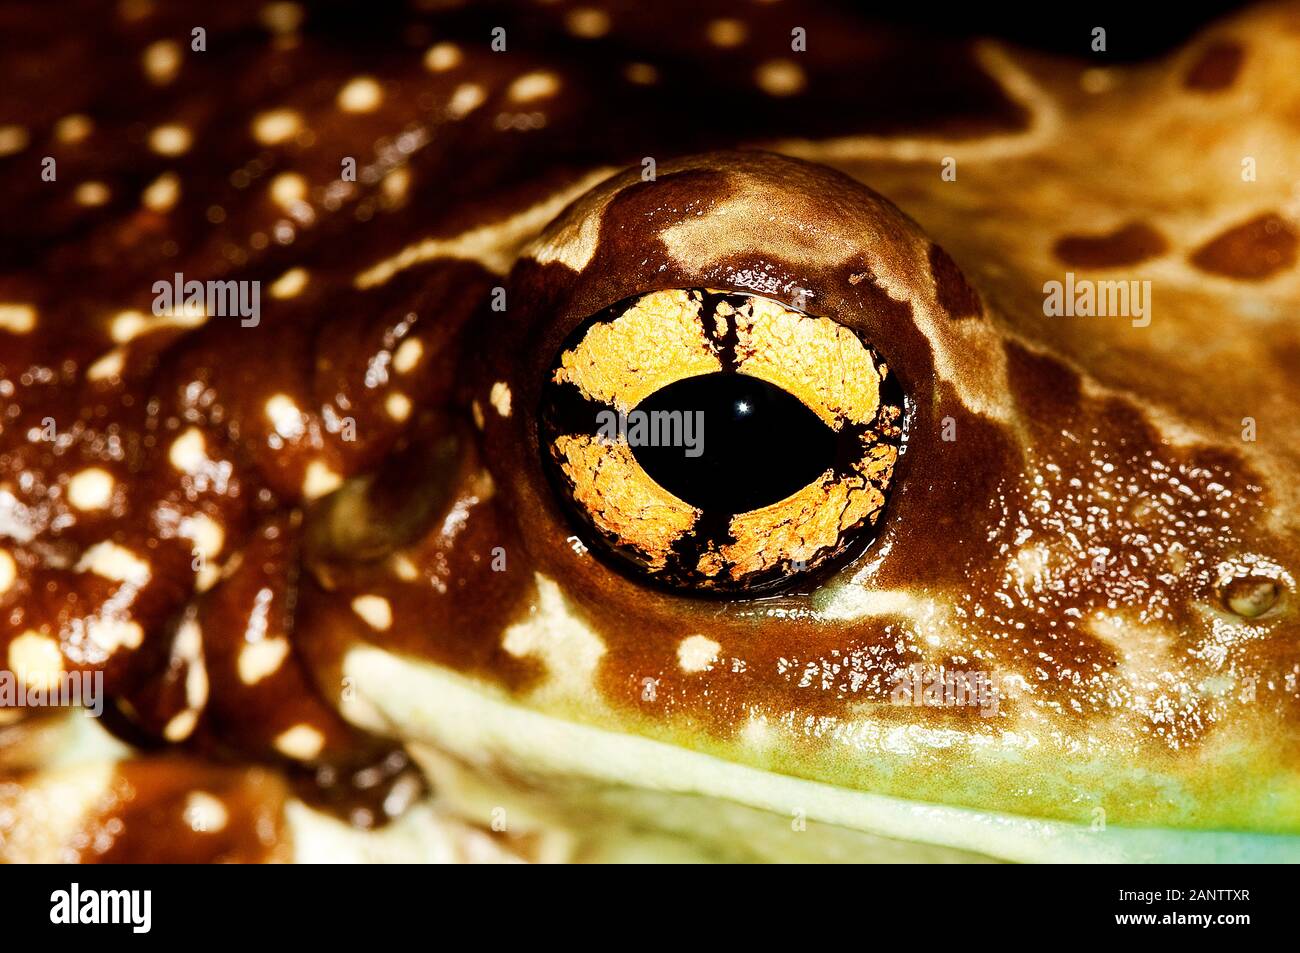 AMAZON Milch Frosch Phrynohyas Resinifictrix, close-up OF EYE Stockfoto